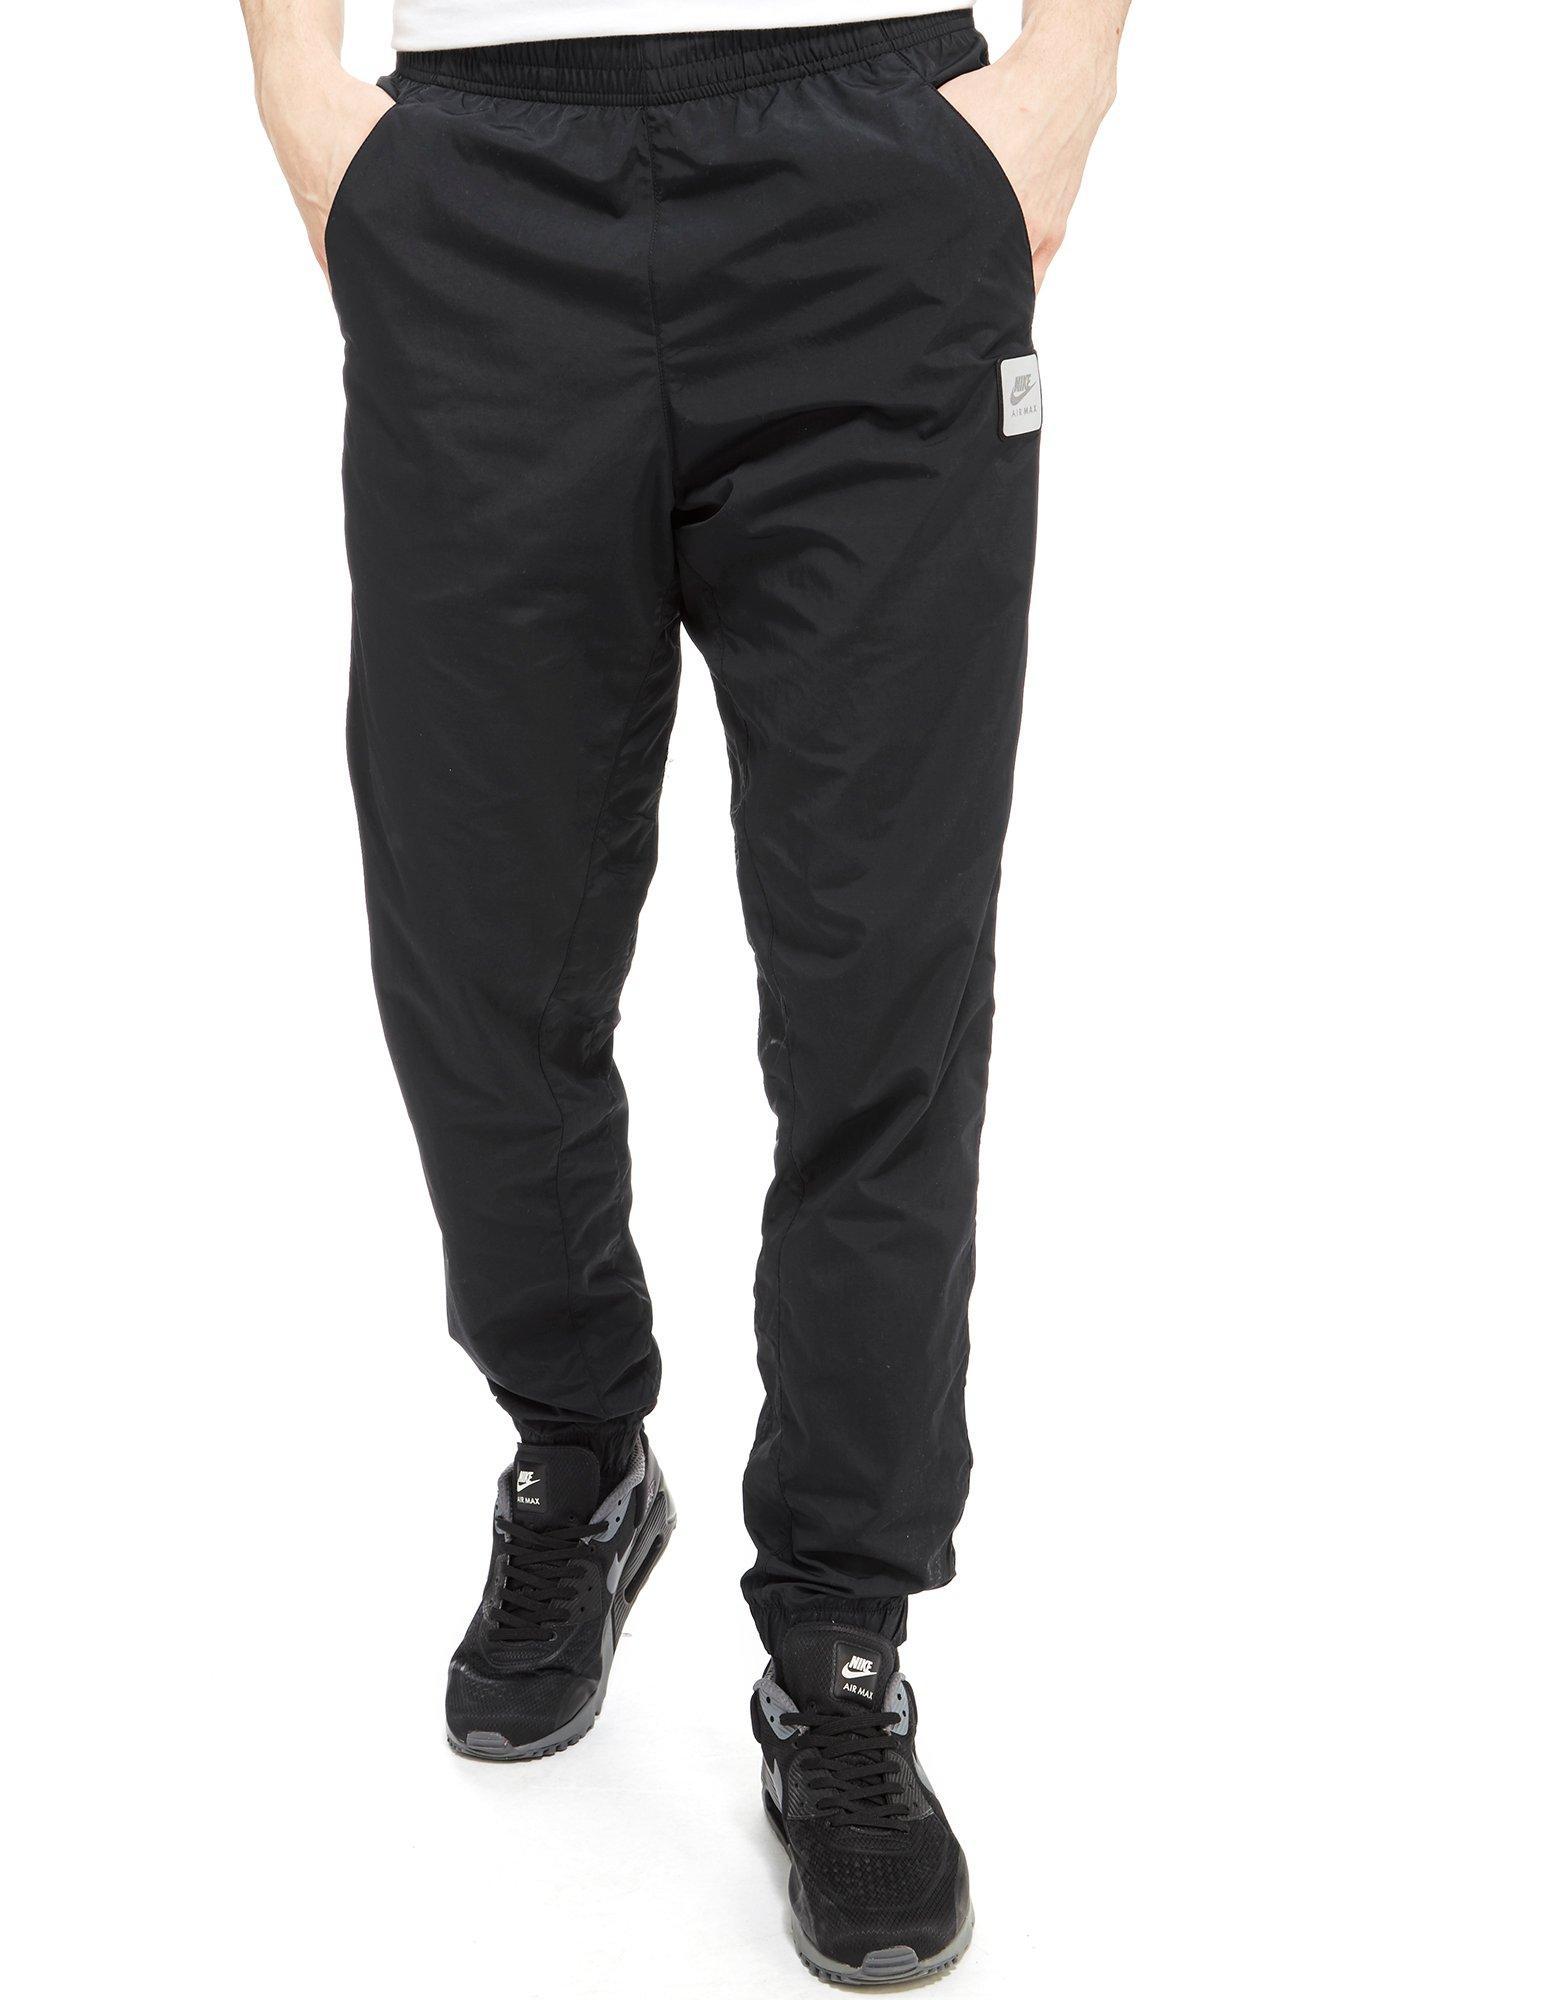 Nike Synthetic Air Max Woven Pants in Black for Men - Lyst